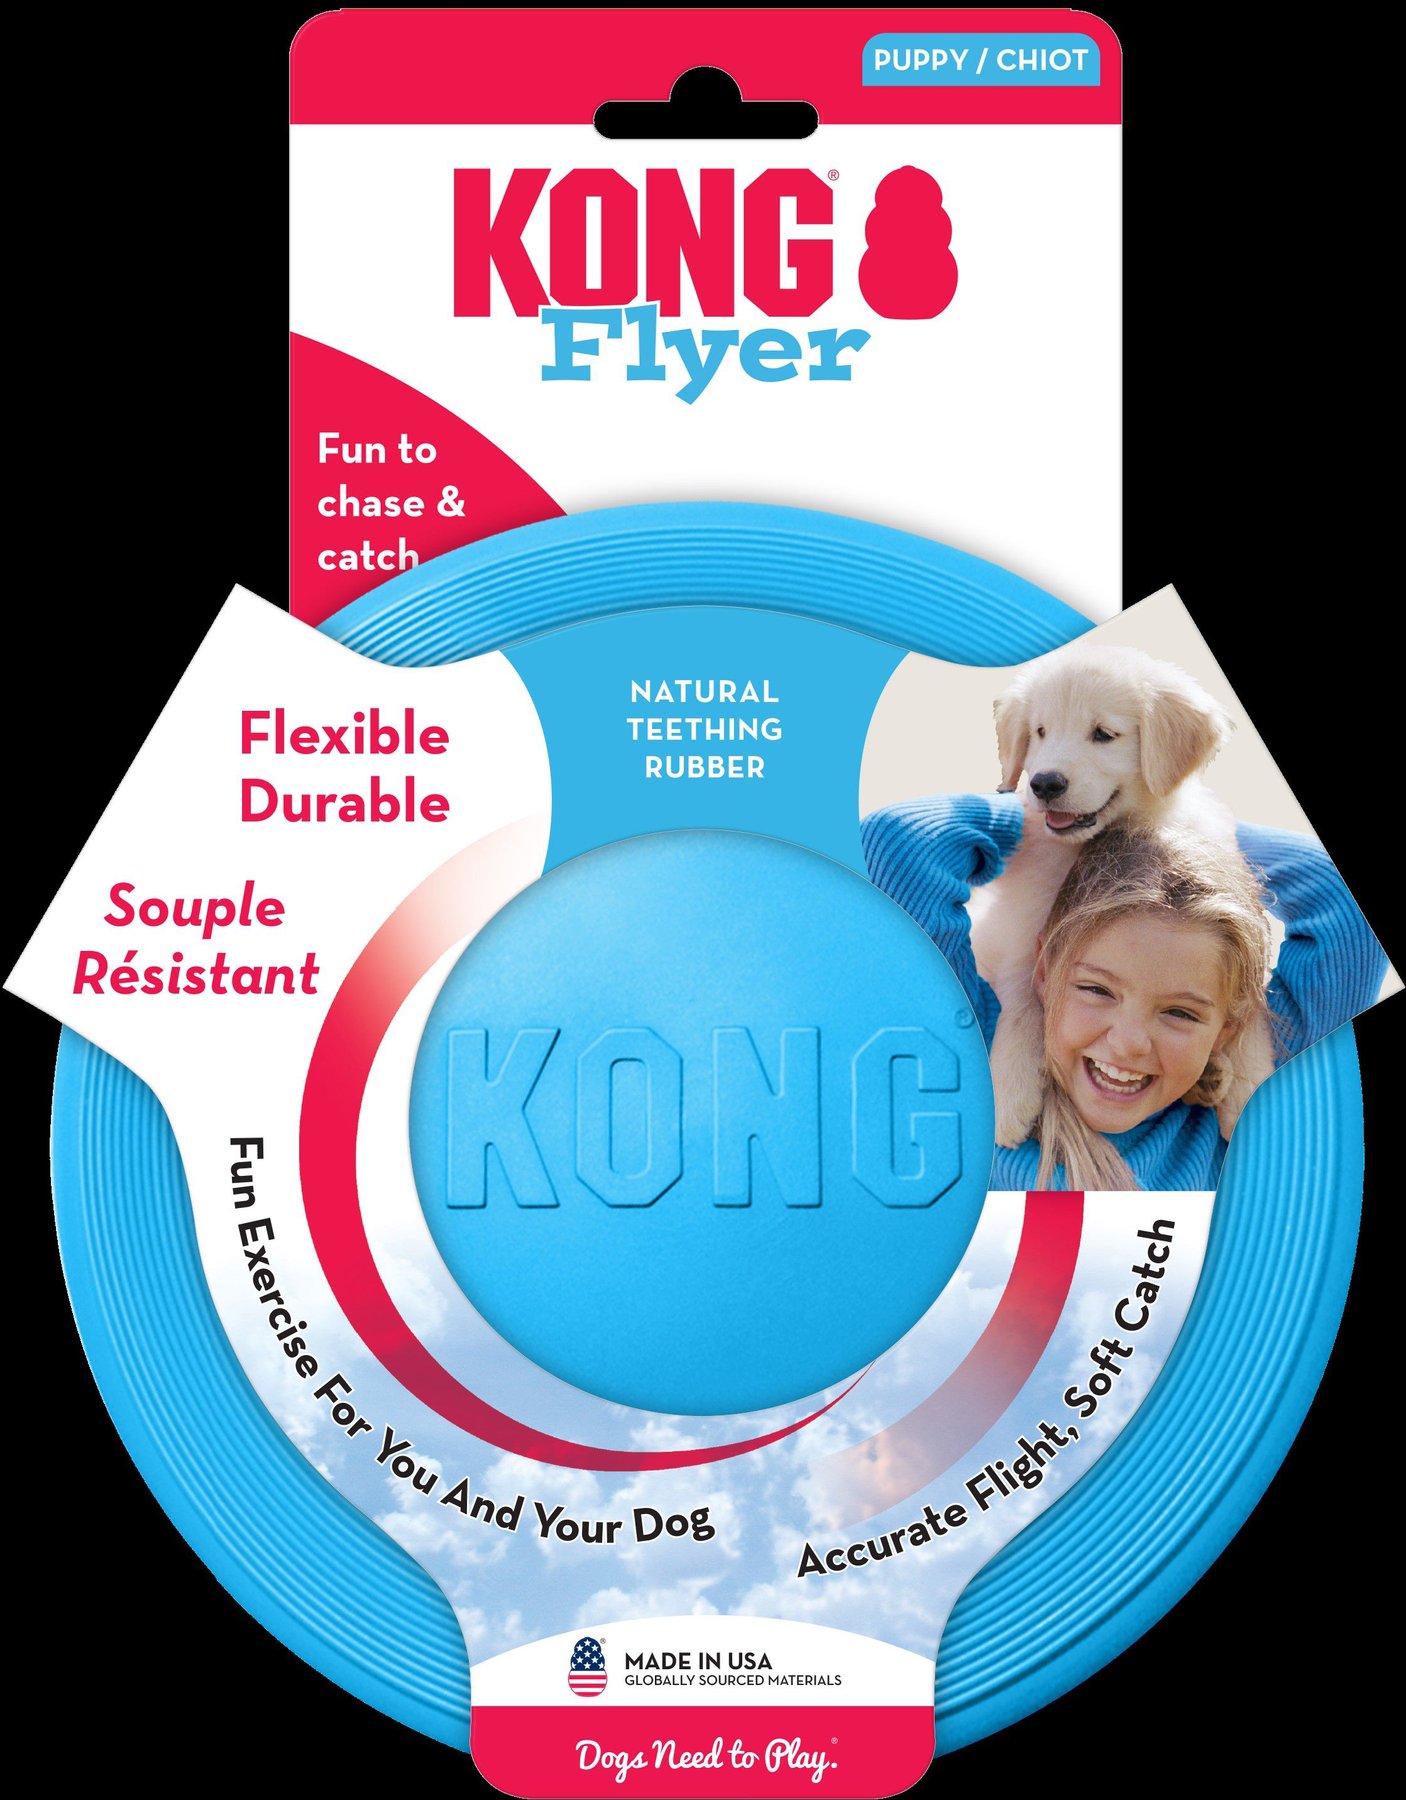 KONG Flyer (Small) [Red] - Pet Wish Pros